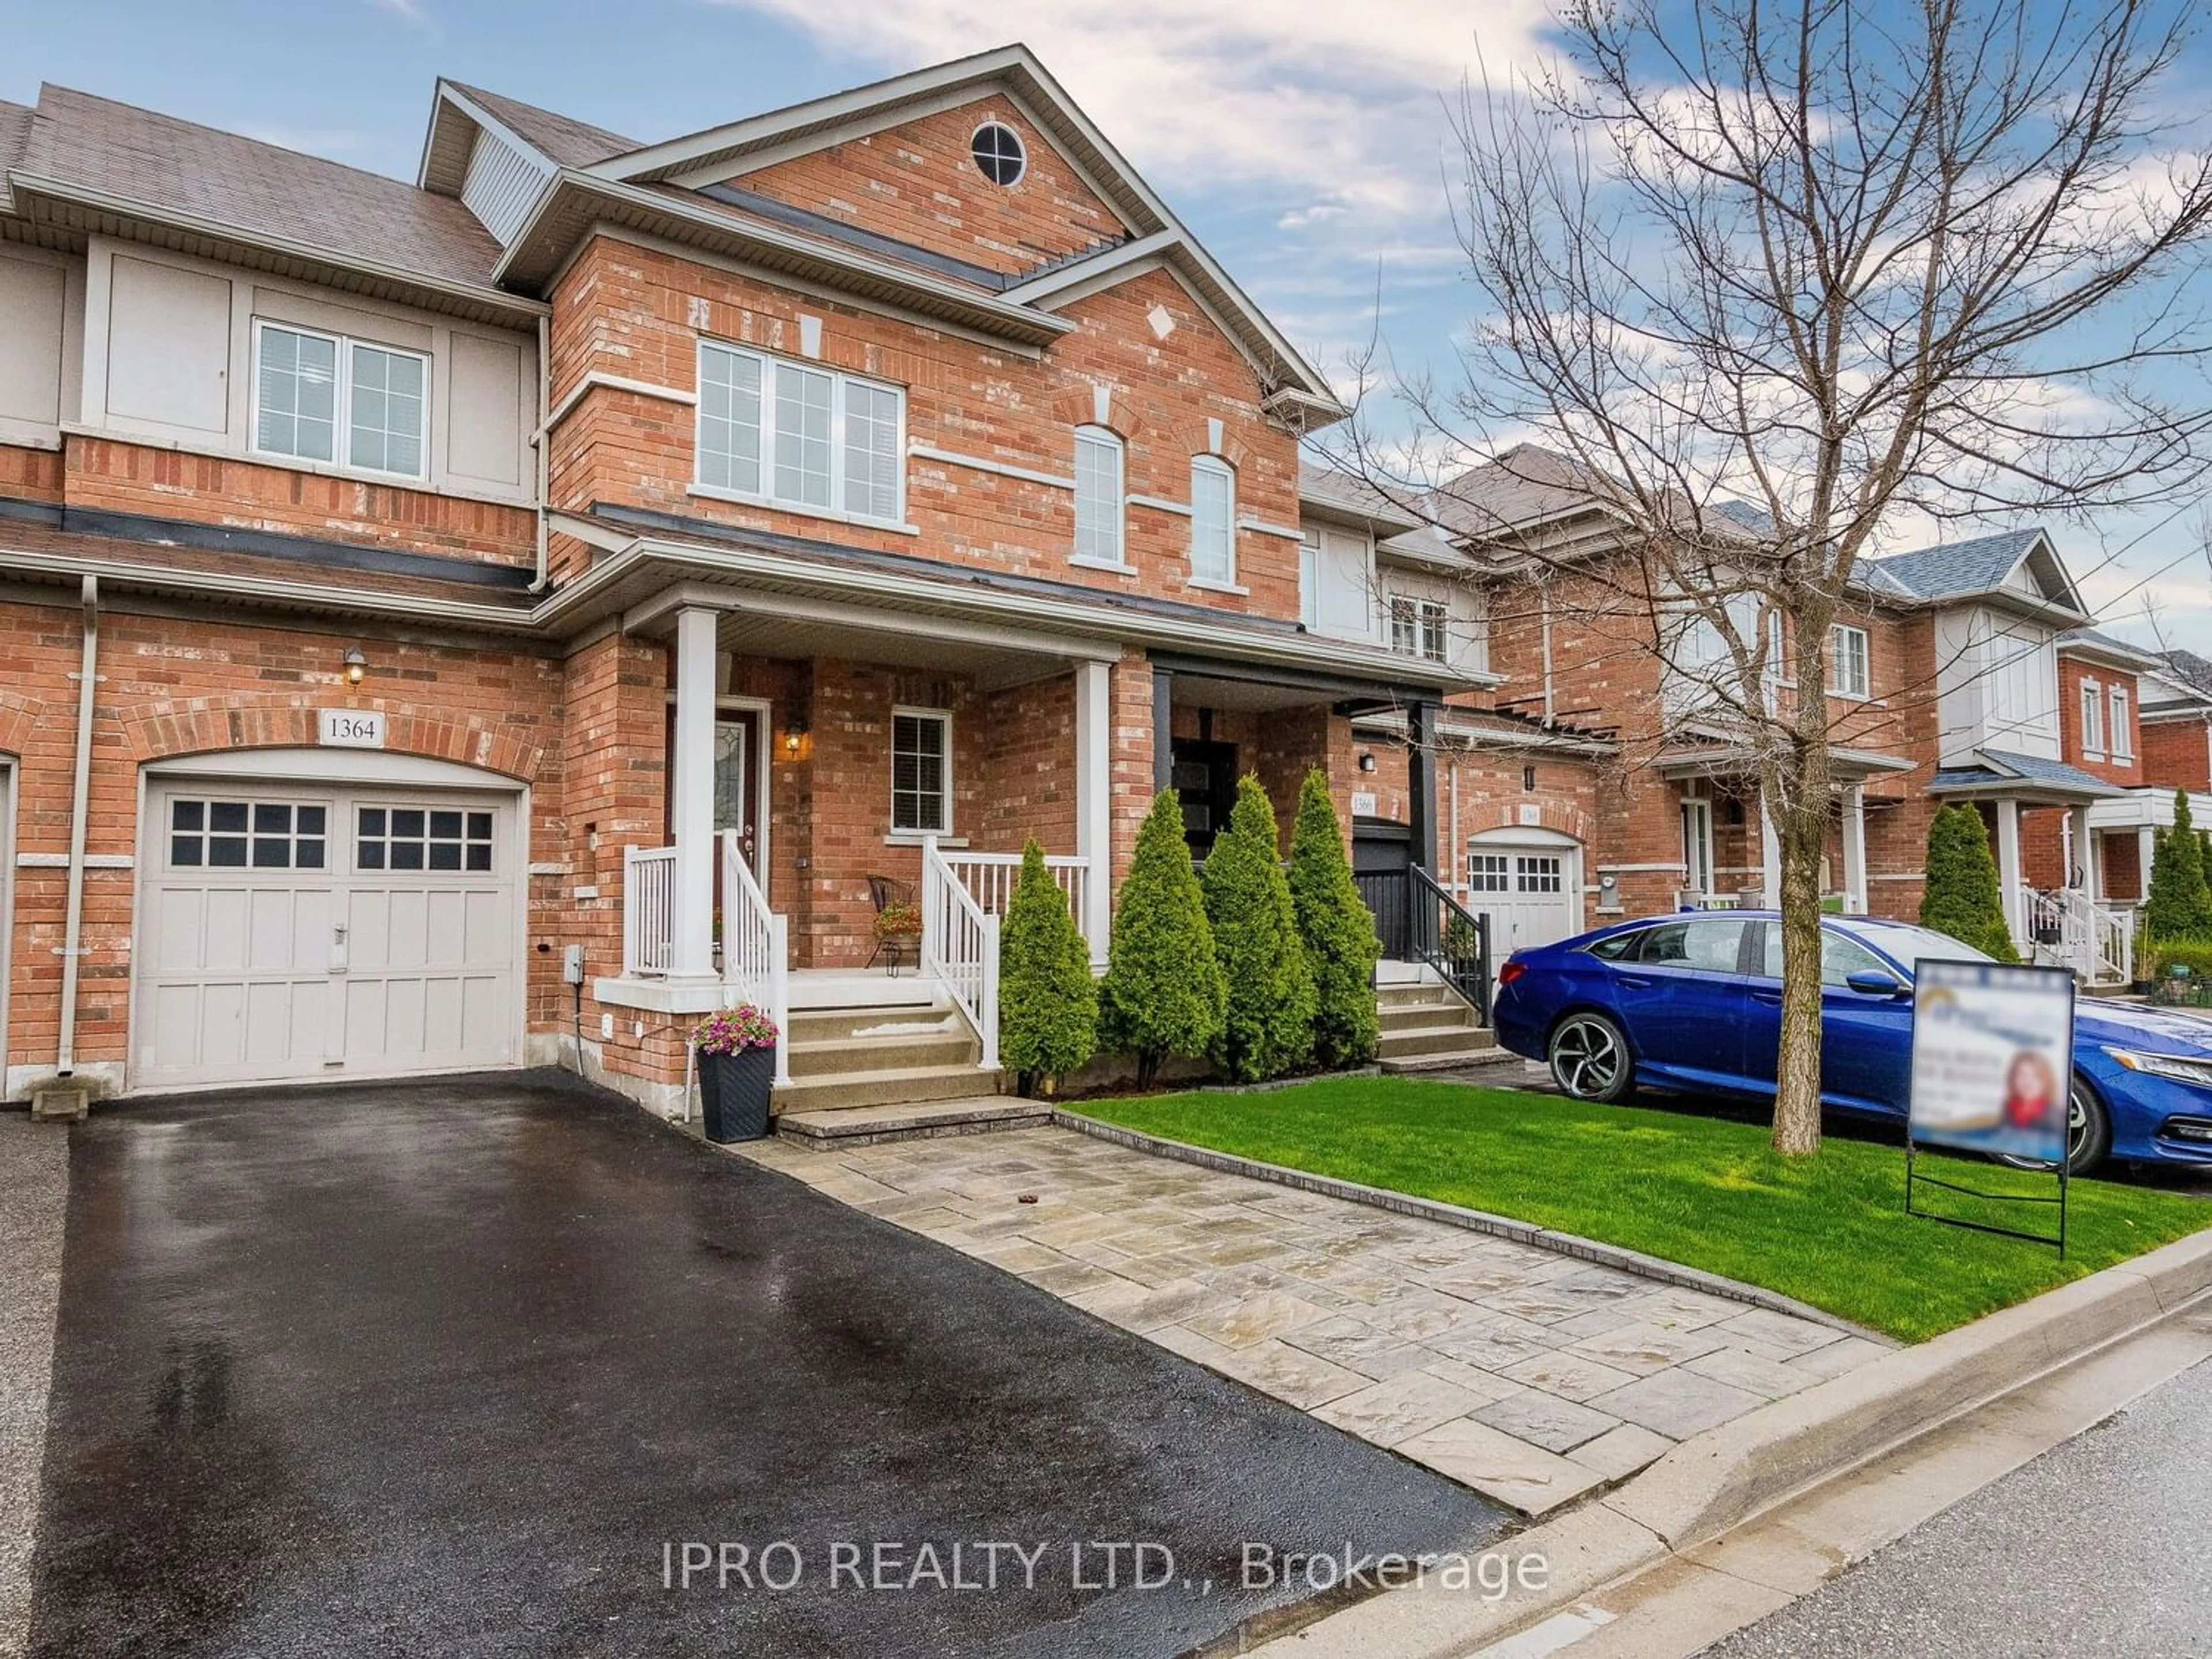 Home with brick exterior material for 1364 Brandon Terr, Milton Ontario L9T 7R3